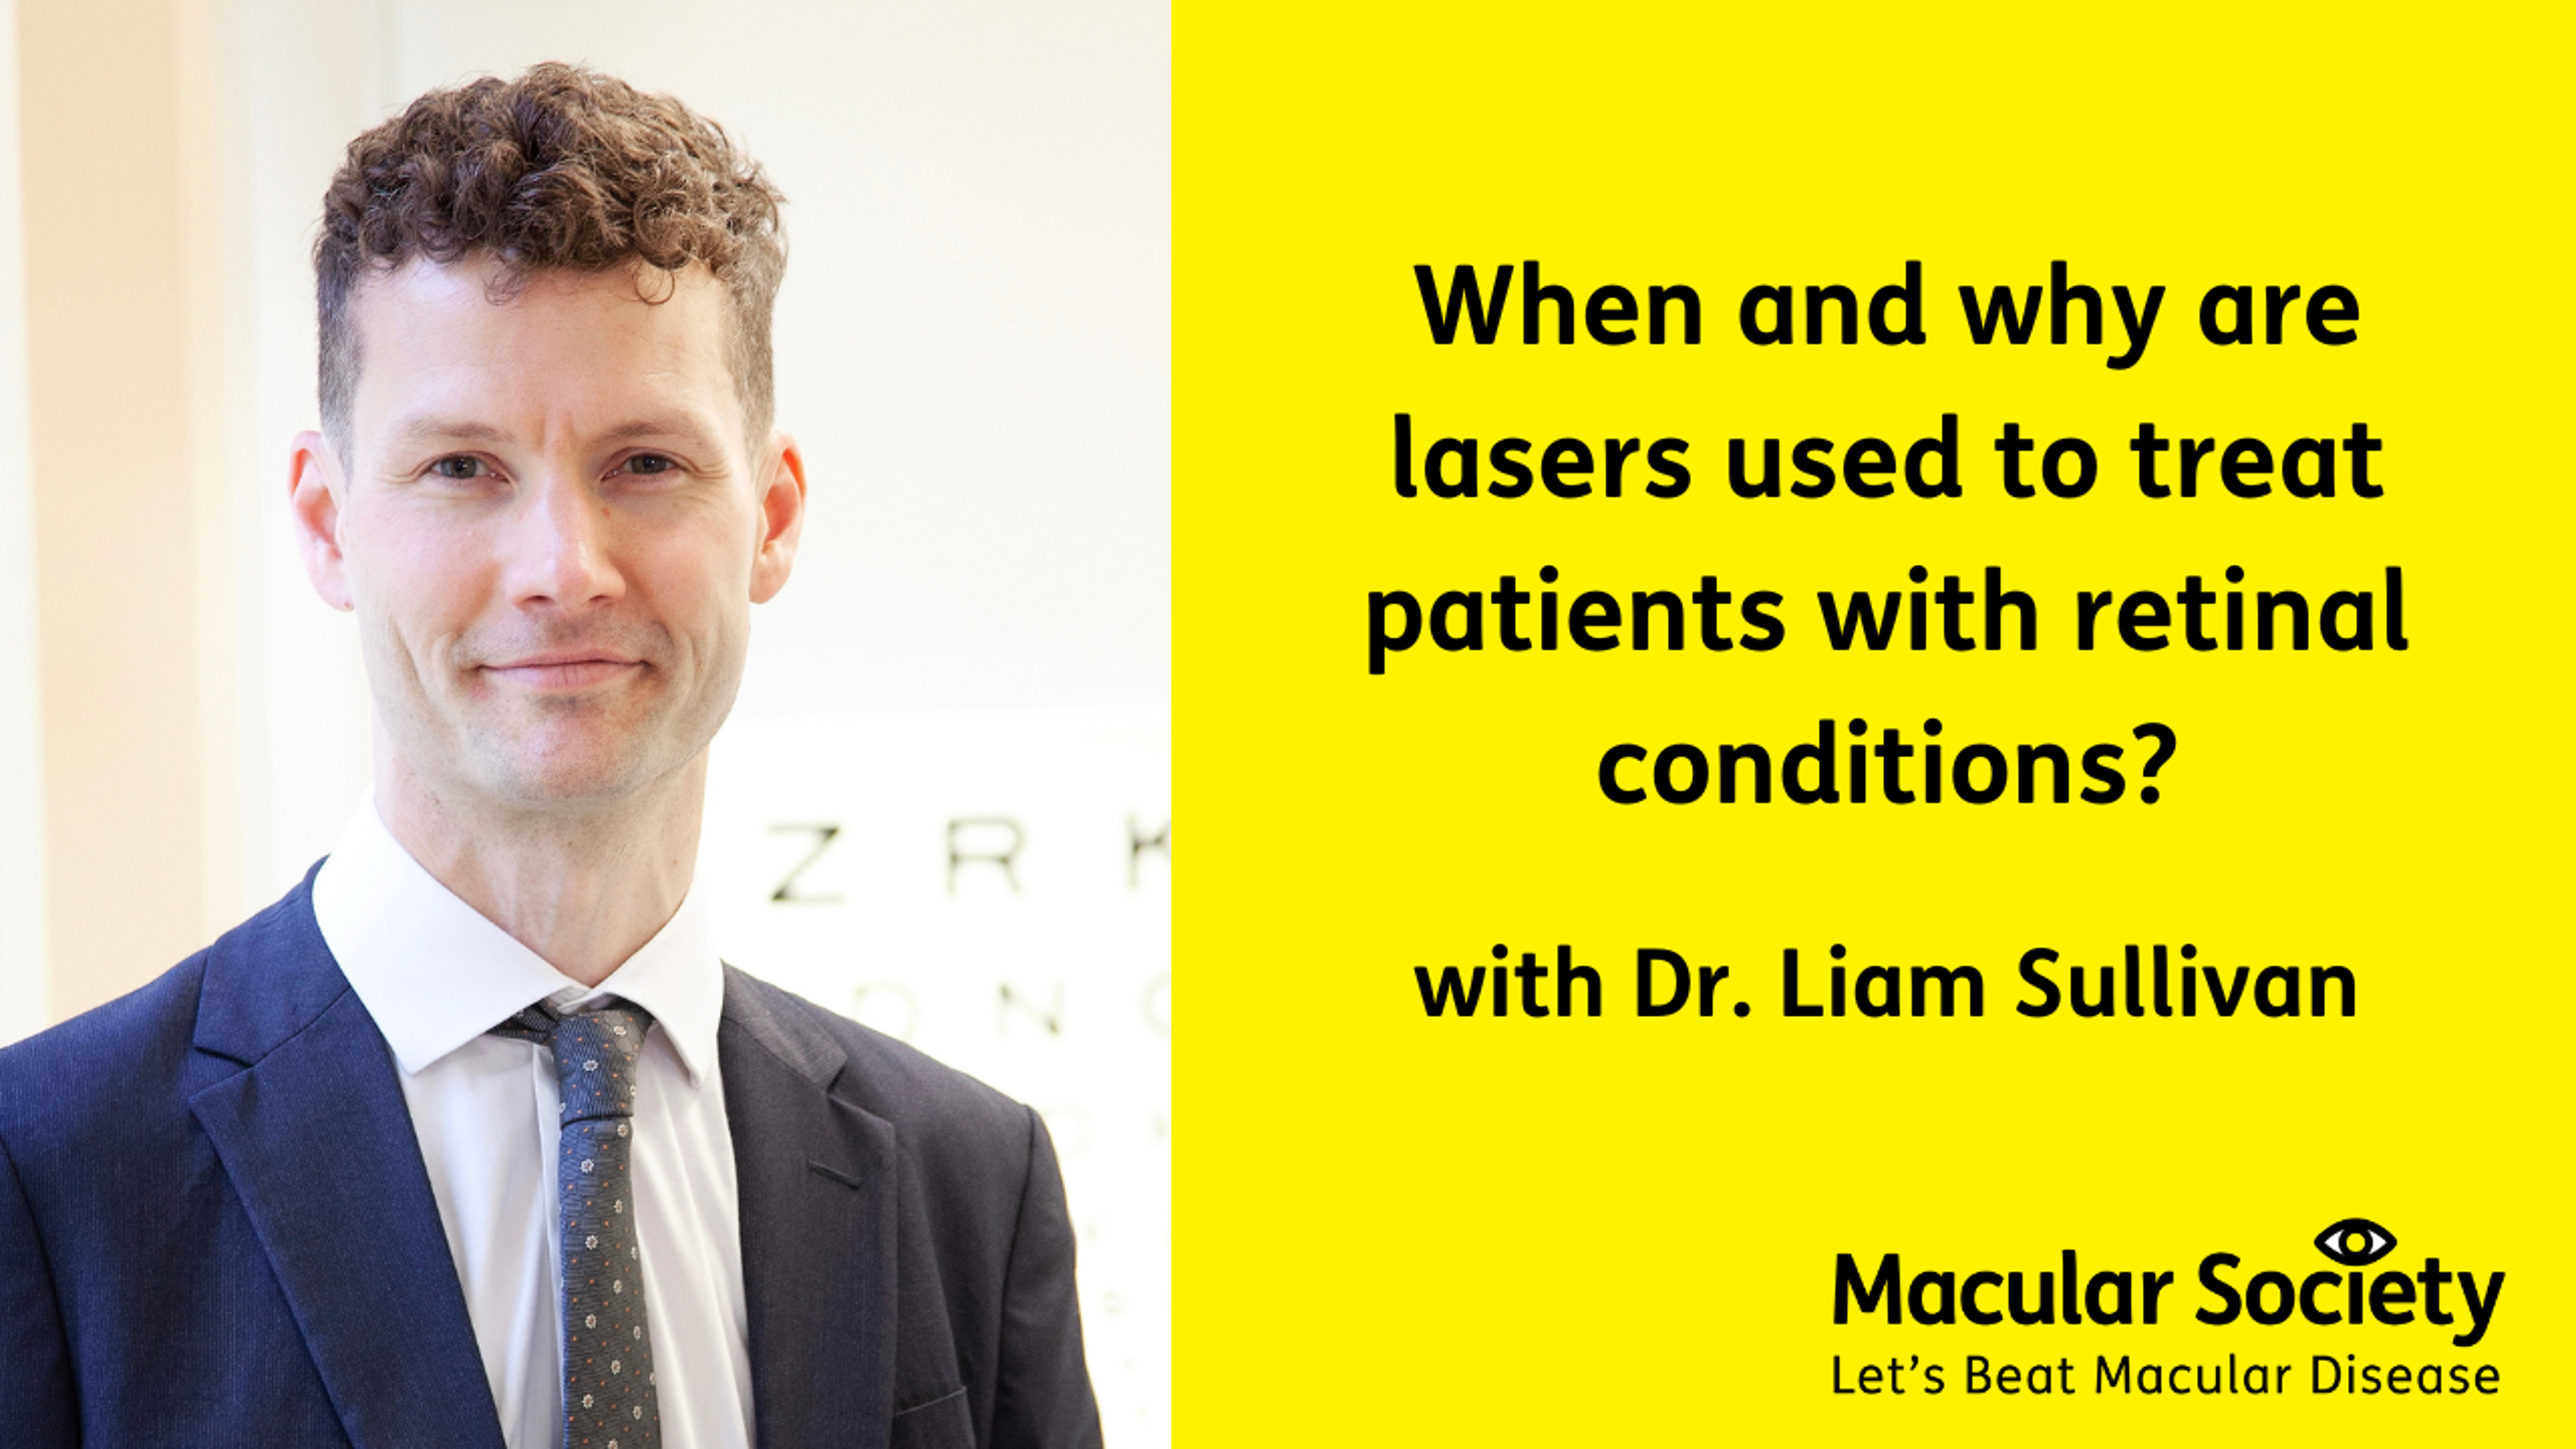 When and why are lasers used to treat patients with retinal conditions? Dr Liam Sullivan